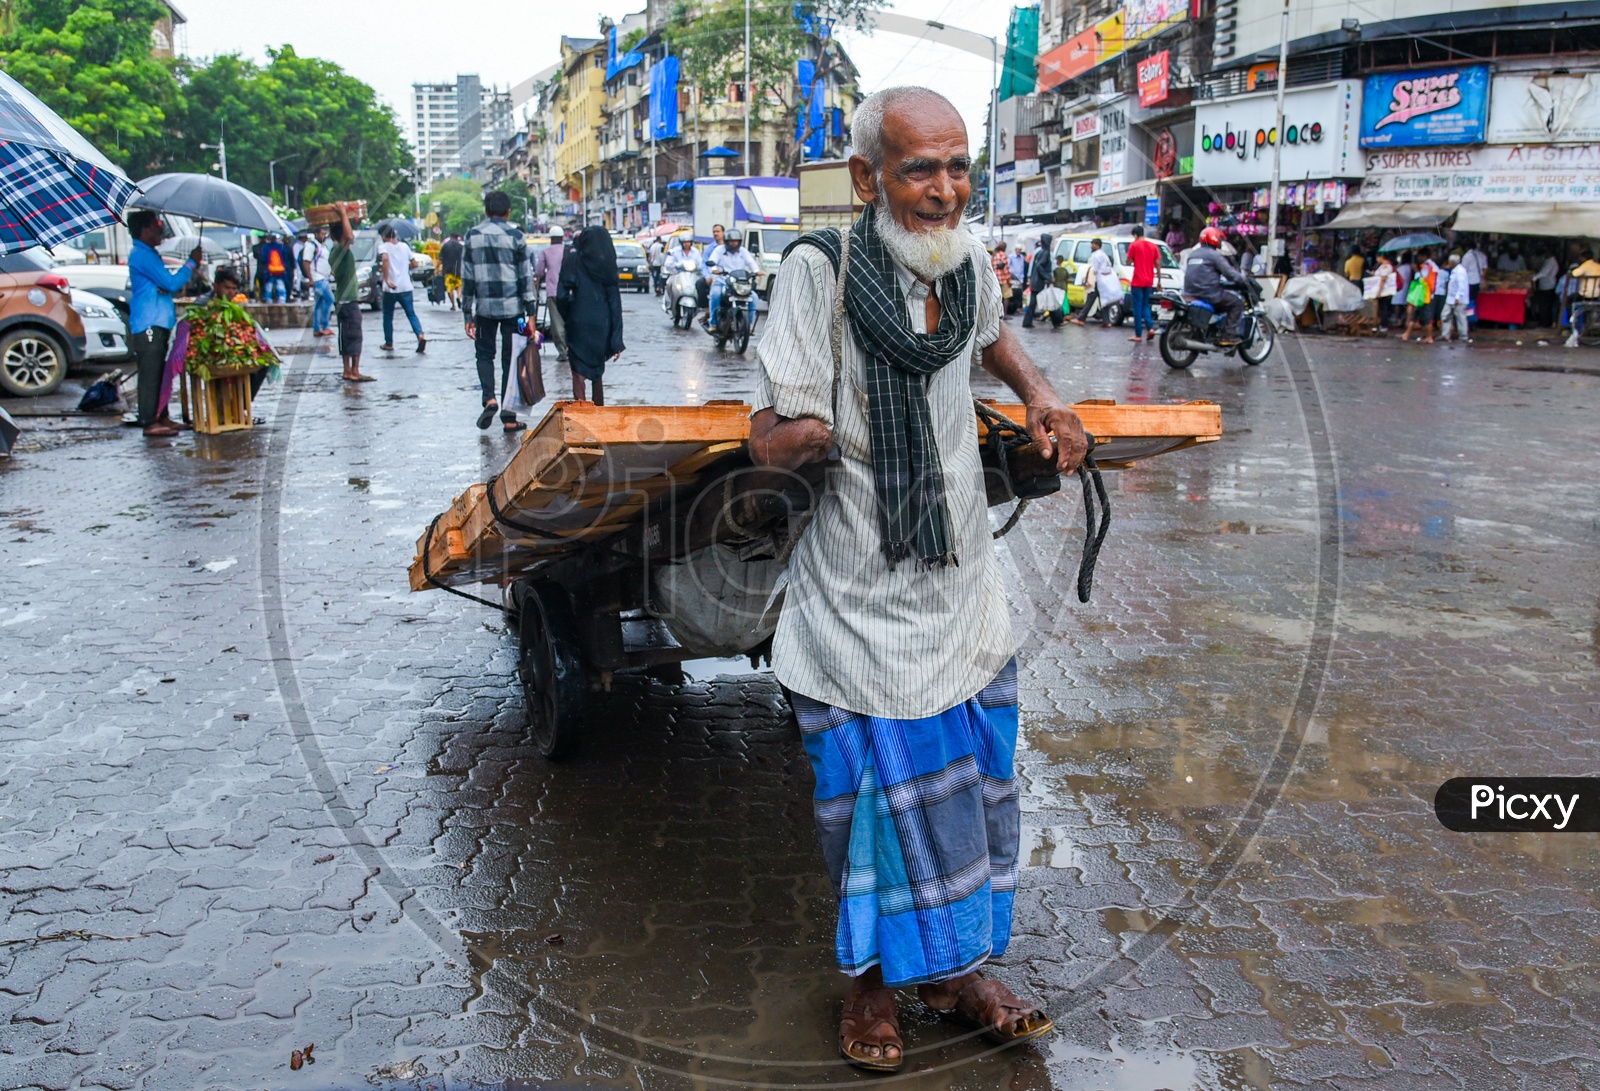 An old man with amputated arm tranporting heavy goods